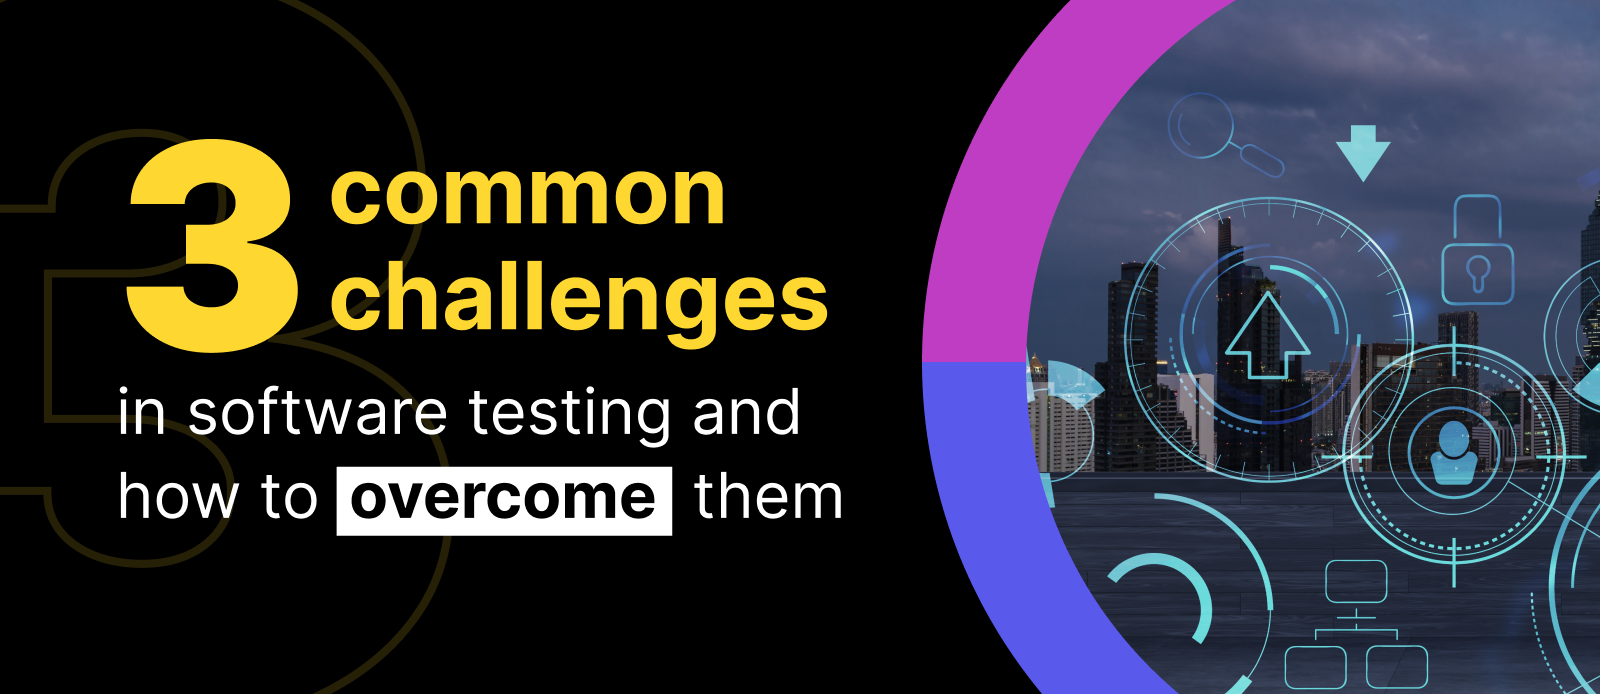 Challenges in software testing - Banner top of the blog.png